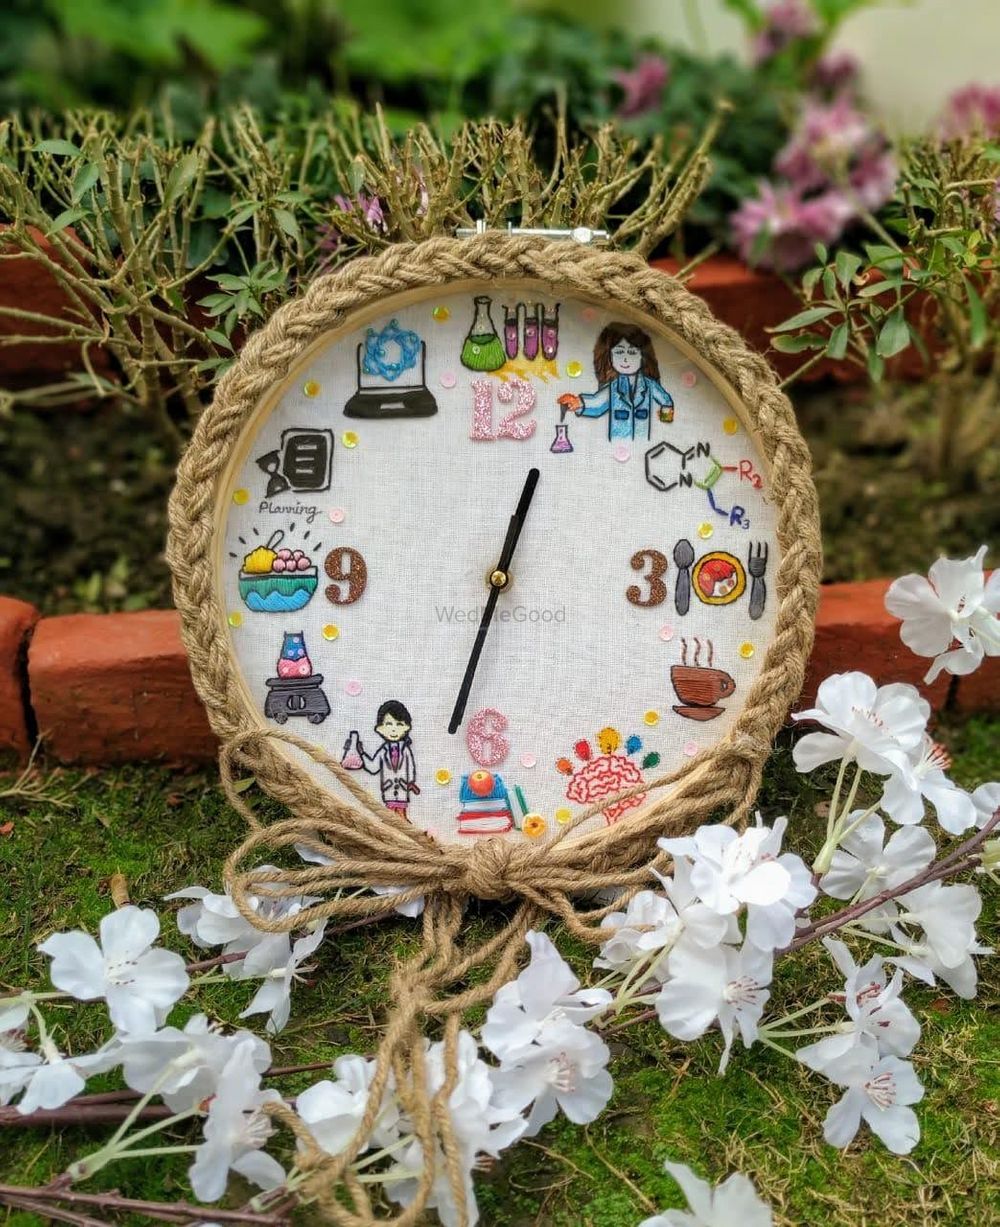 Photo From Embroidered Wall Clock - By The Pink Umbrella 